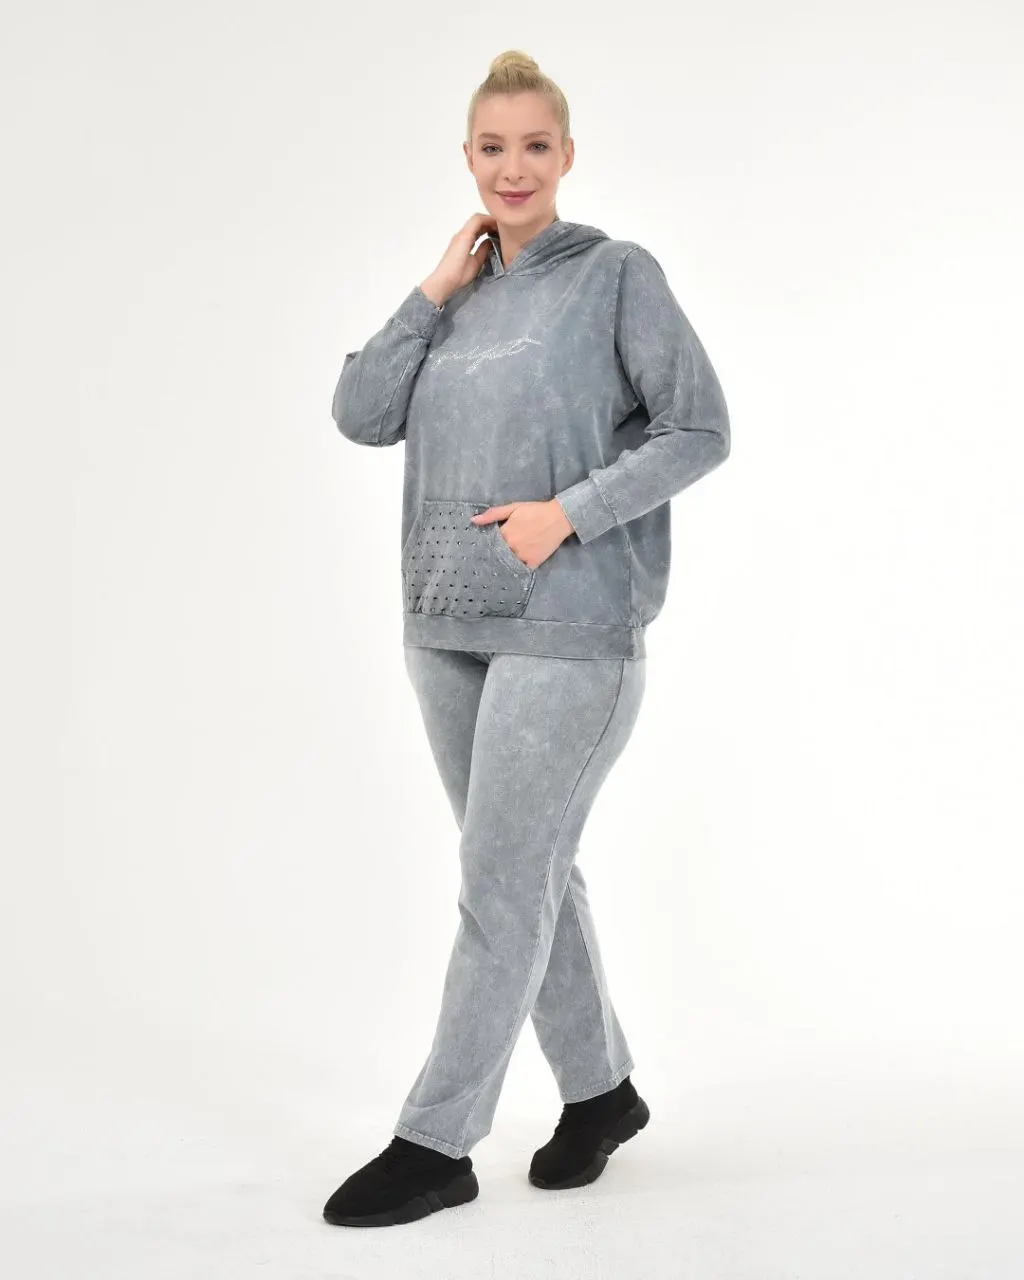 Diaves Women Plus Size Autumn-Winter Fashion Hooded Sweatshirt and Pants 2 Pieces Casual Tracksuit Sets Turkish Quality